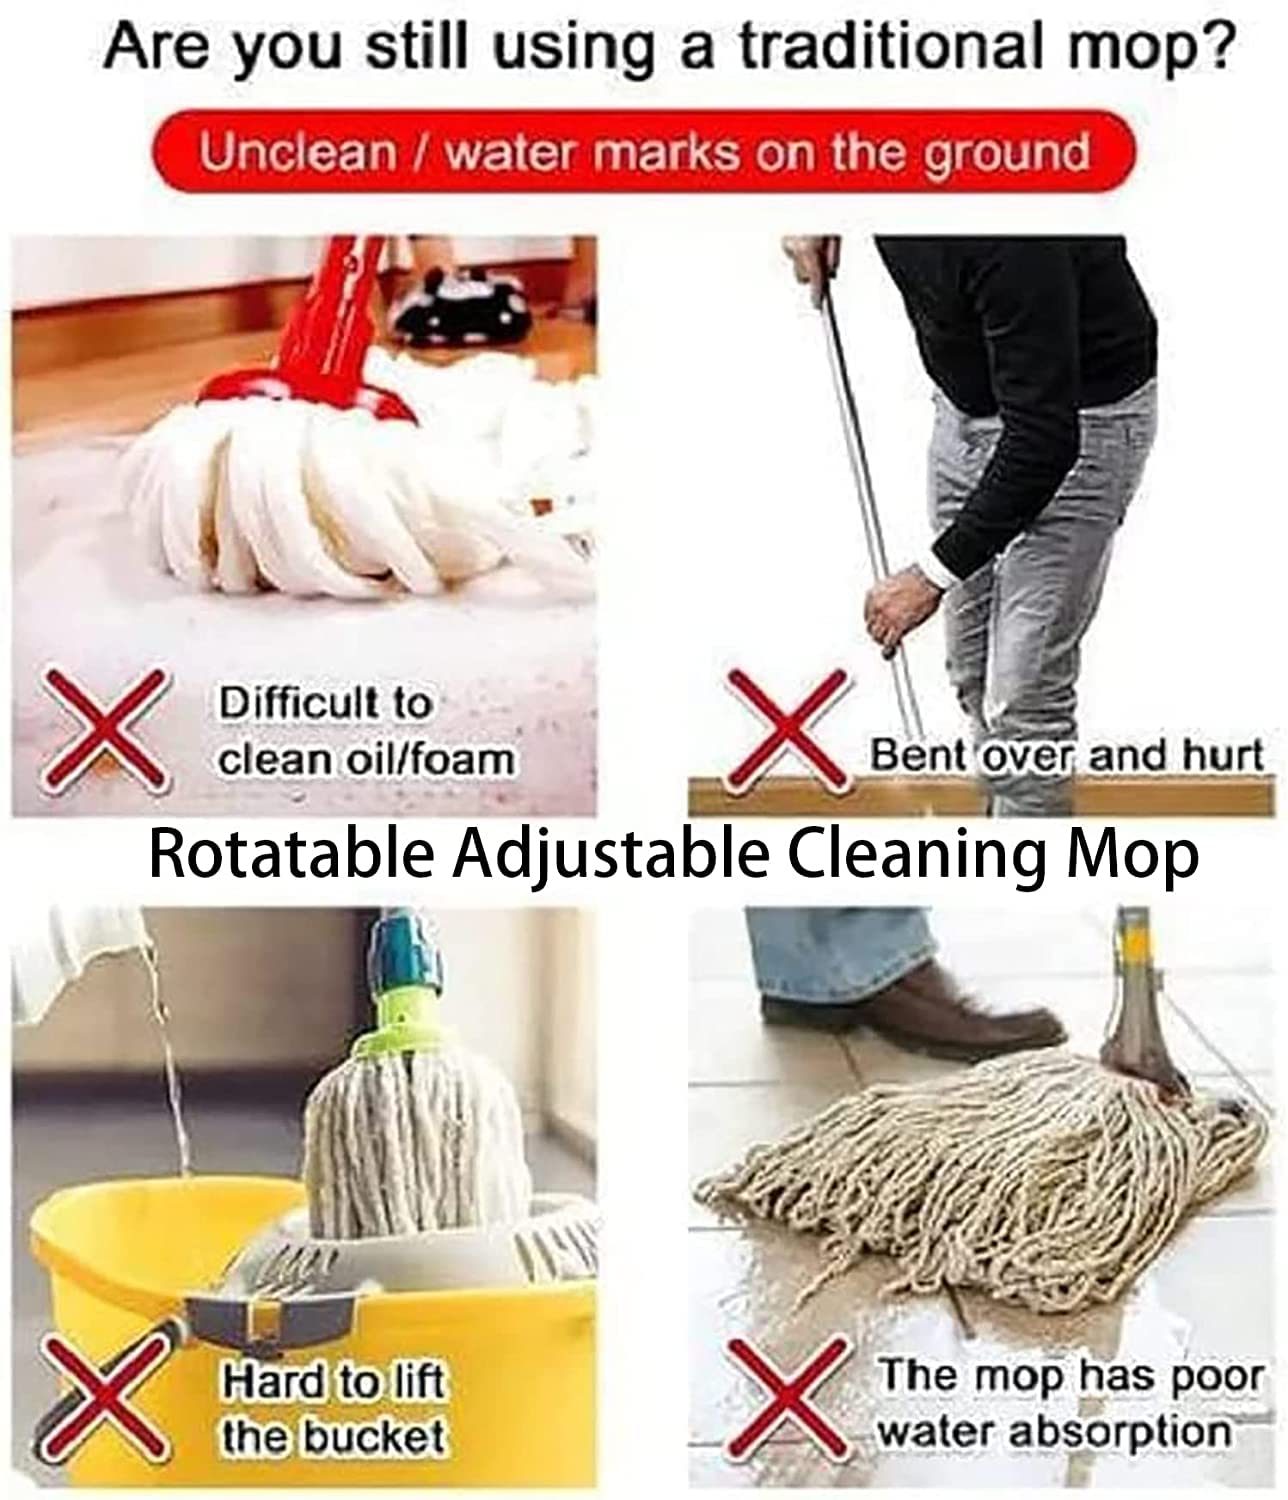 360° Rotatable Adjustable Cleaning Mop - 2022 New Extendable Wall Cleaning Mop, Long Handle Microfiber Spin Mop, Easy Cleaning Spin Mop Head Replacement for Wall, Ceiling, Window (with 2 Mop Heads)